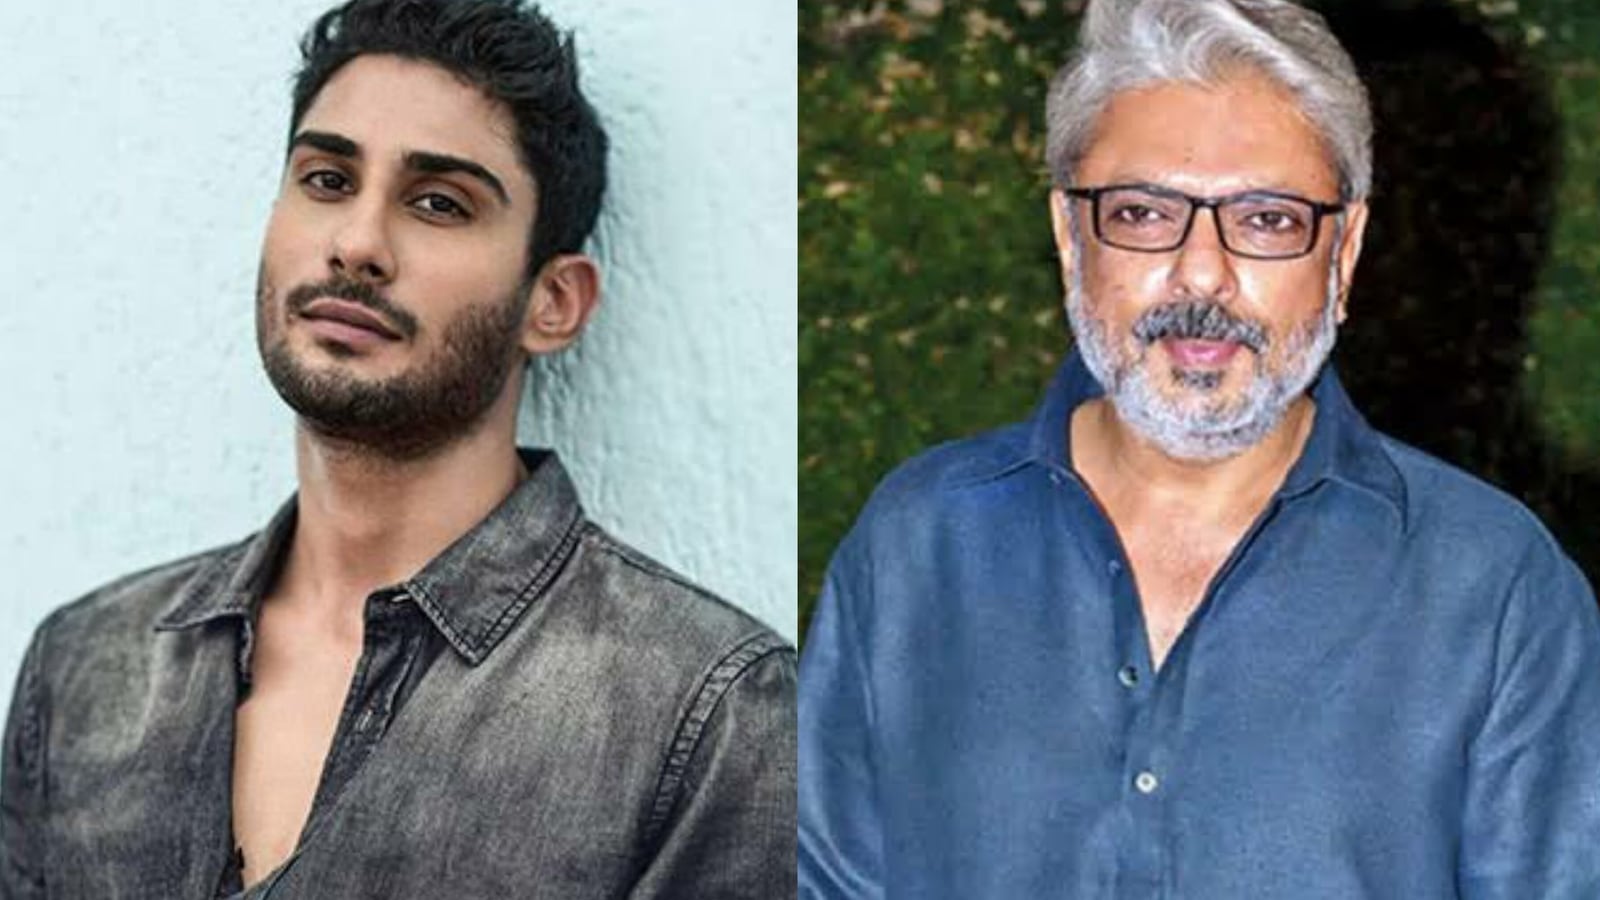 Prateik Babbar reveals Sanjay Leela Bhansali called him for Saawariya but he was in rehab: ‘It couldn’t have worked’